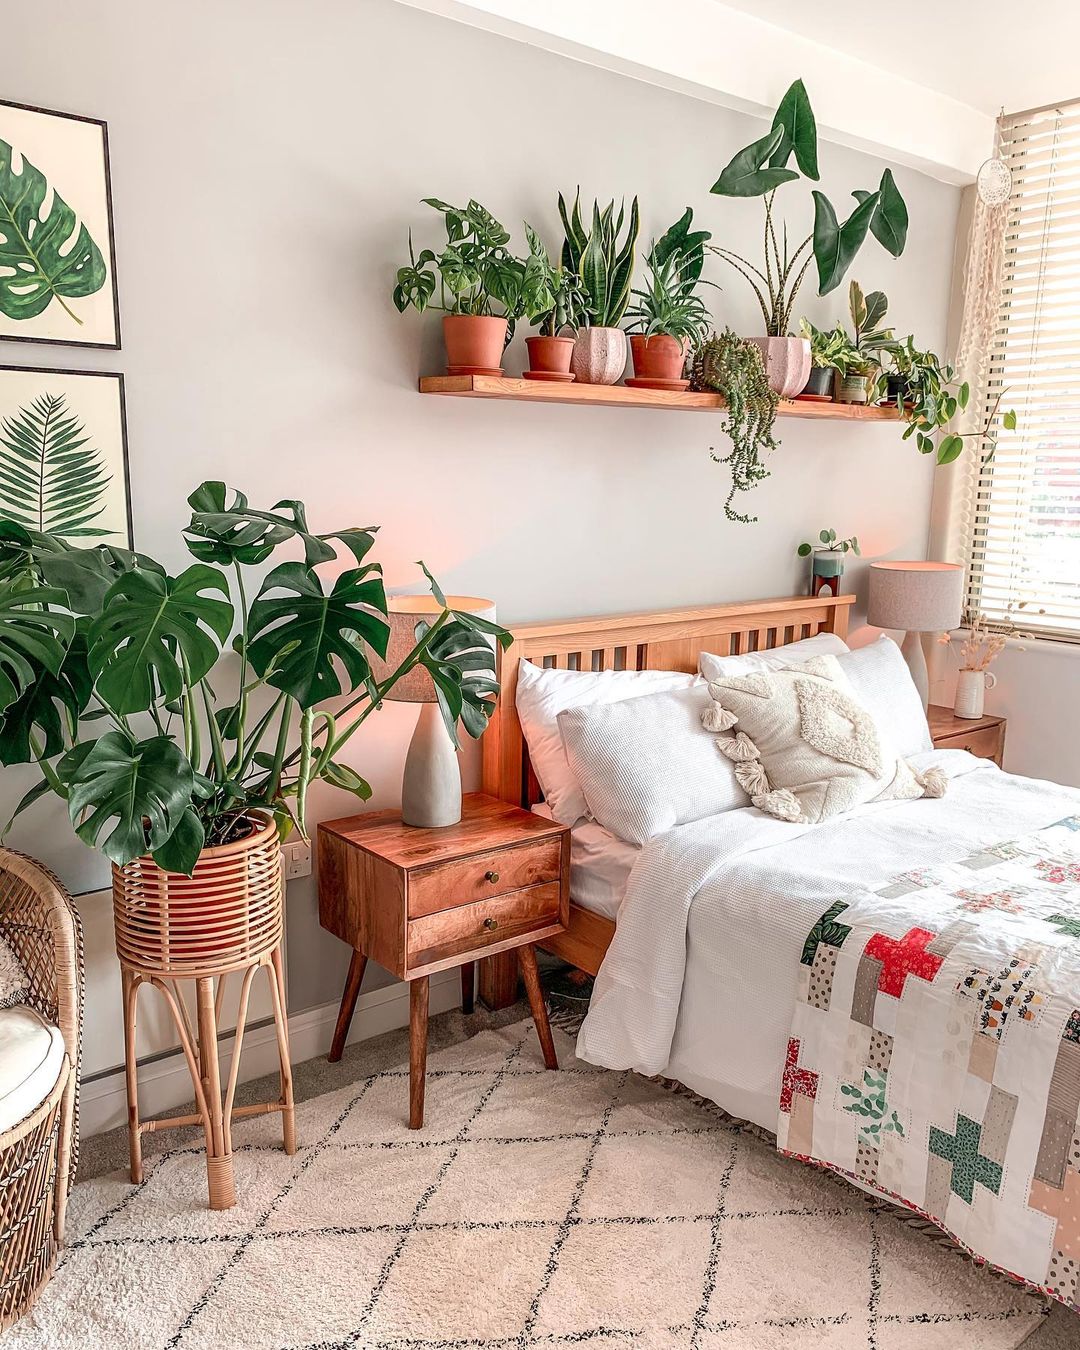 A variety of plants in planters and on shelves in the bedroom. Photo by Instagram User @themacramejungle